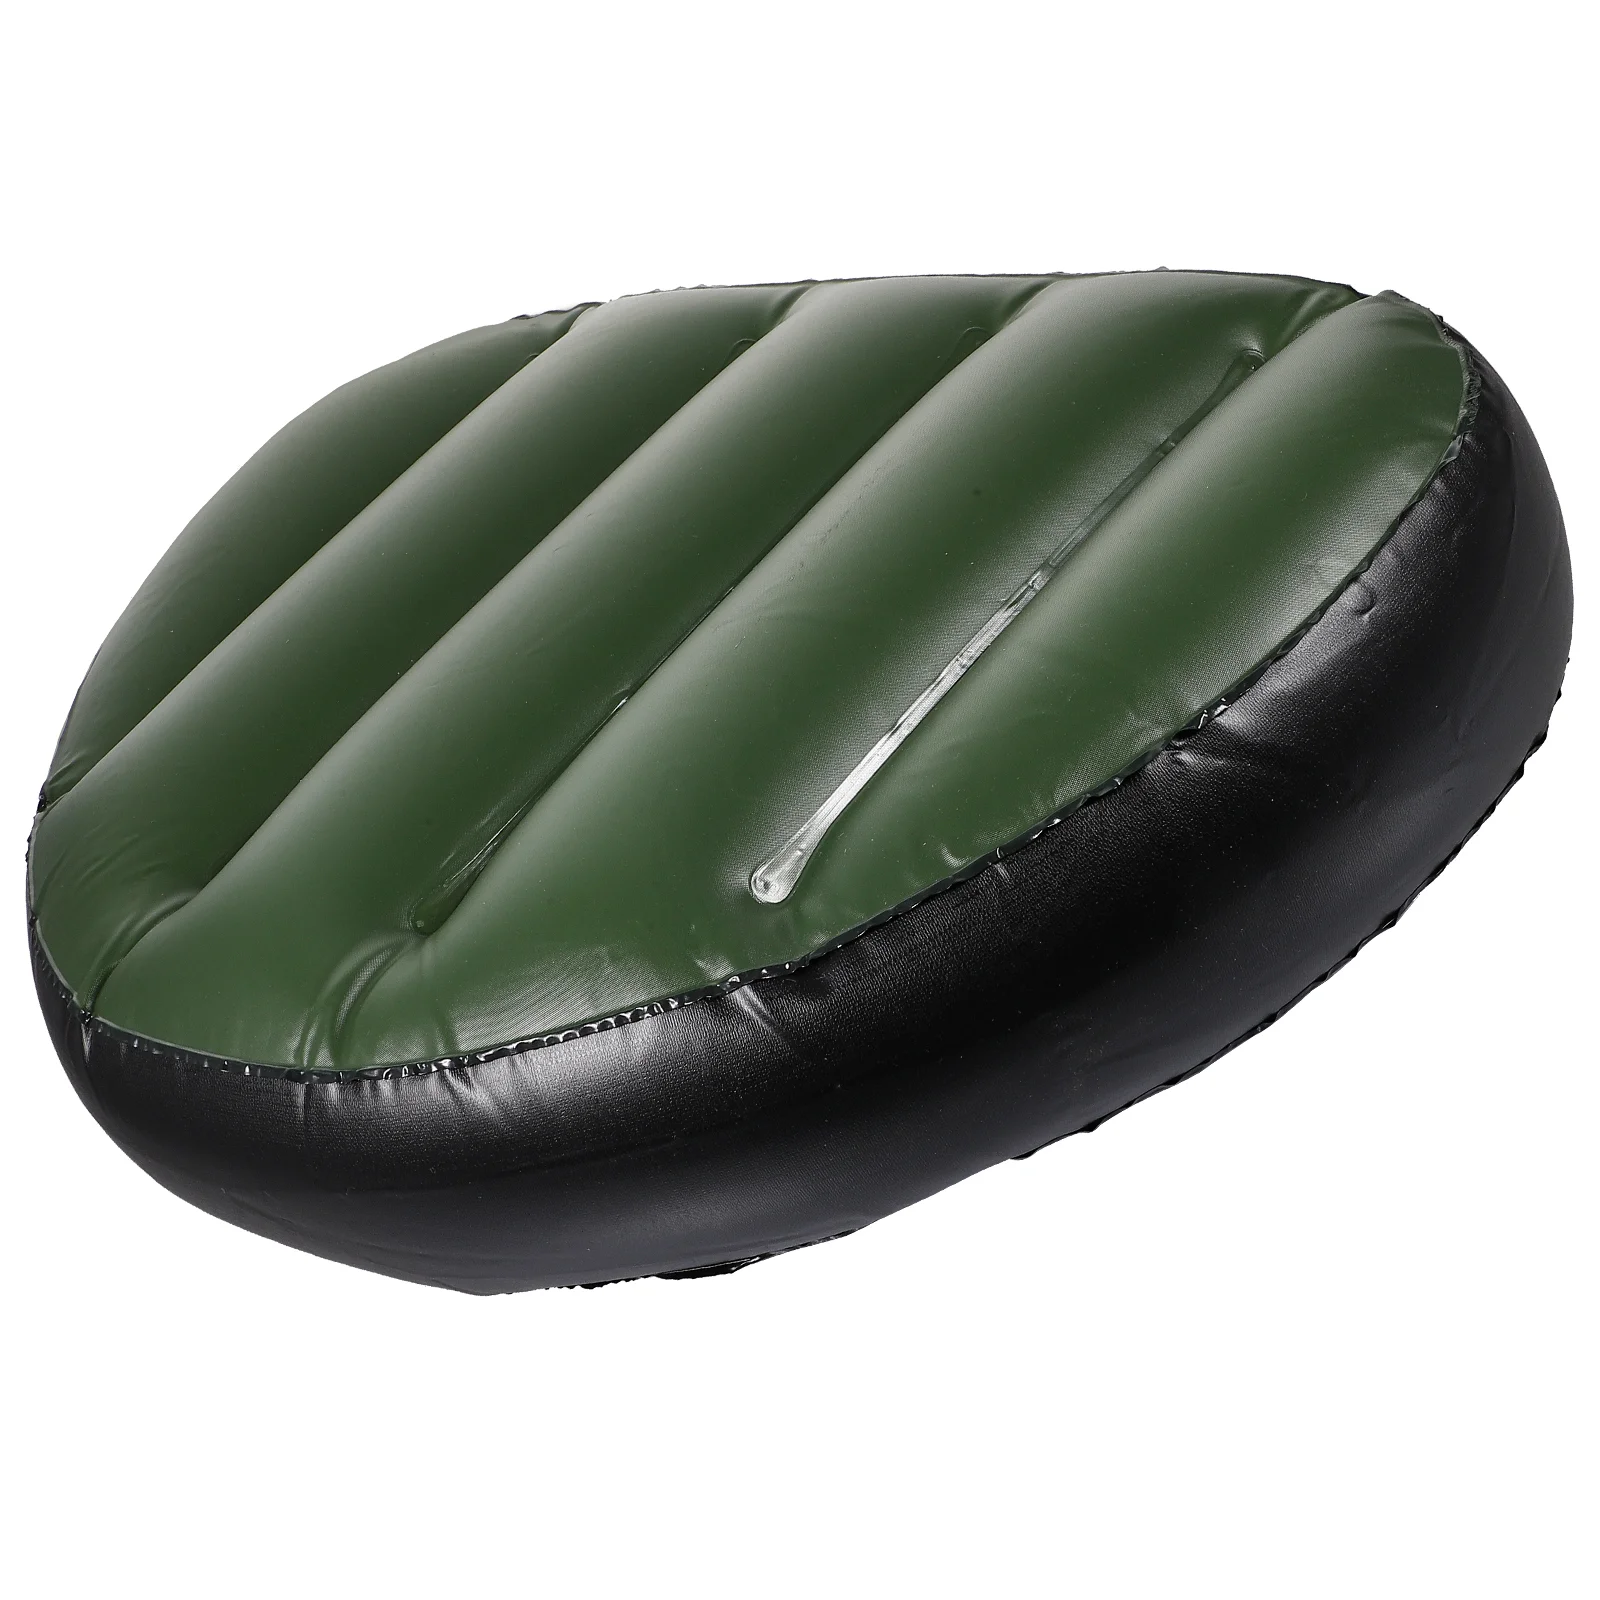 

Rafting Cushion Outdoor Seating Cushions Inflatable Saddle Drifting Supply Chair Multifunctional Boat Pad Universal Pvc